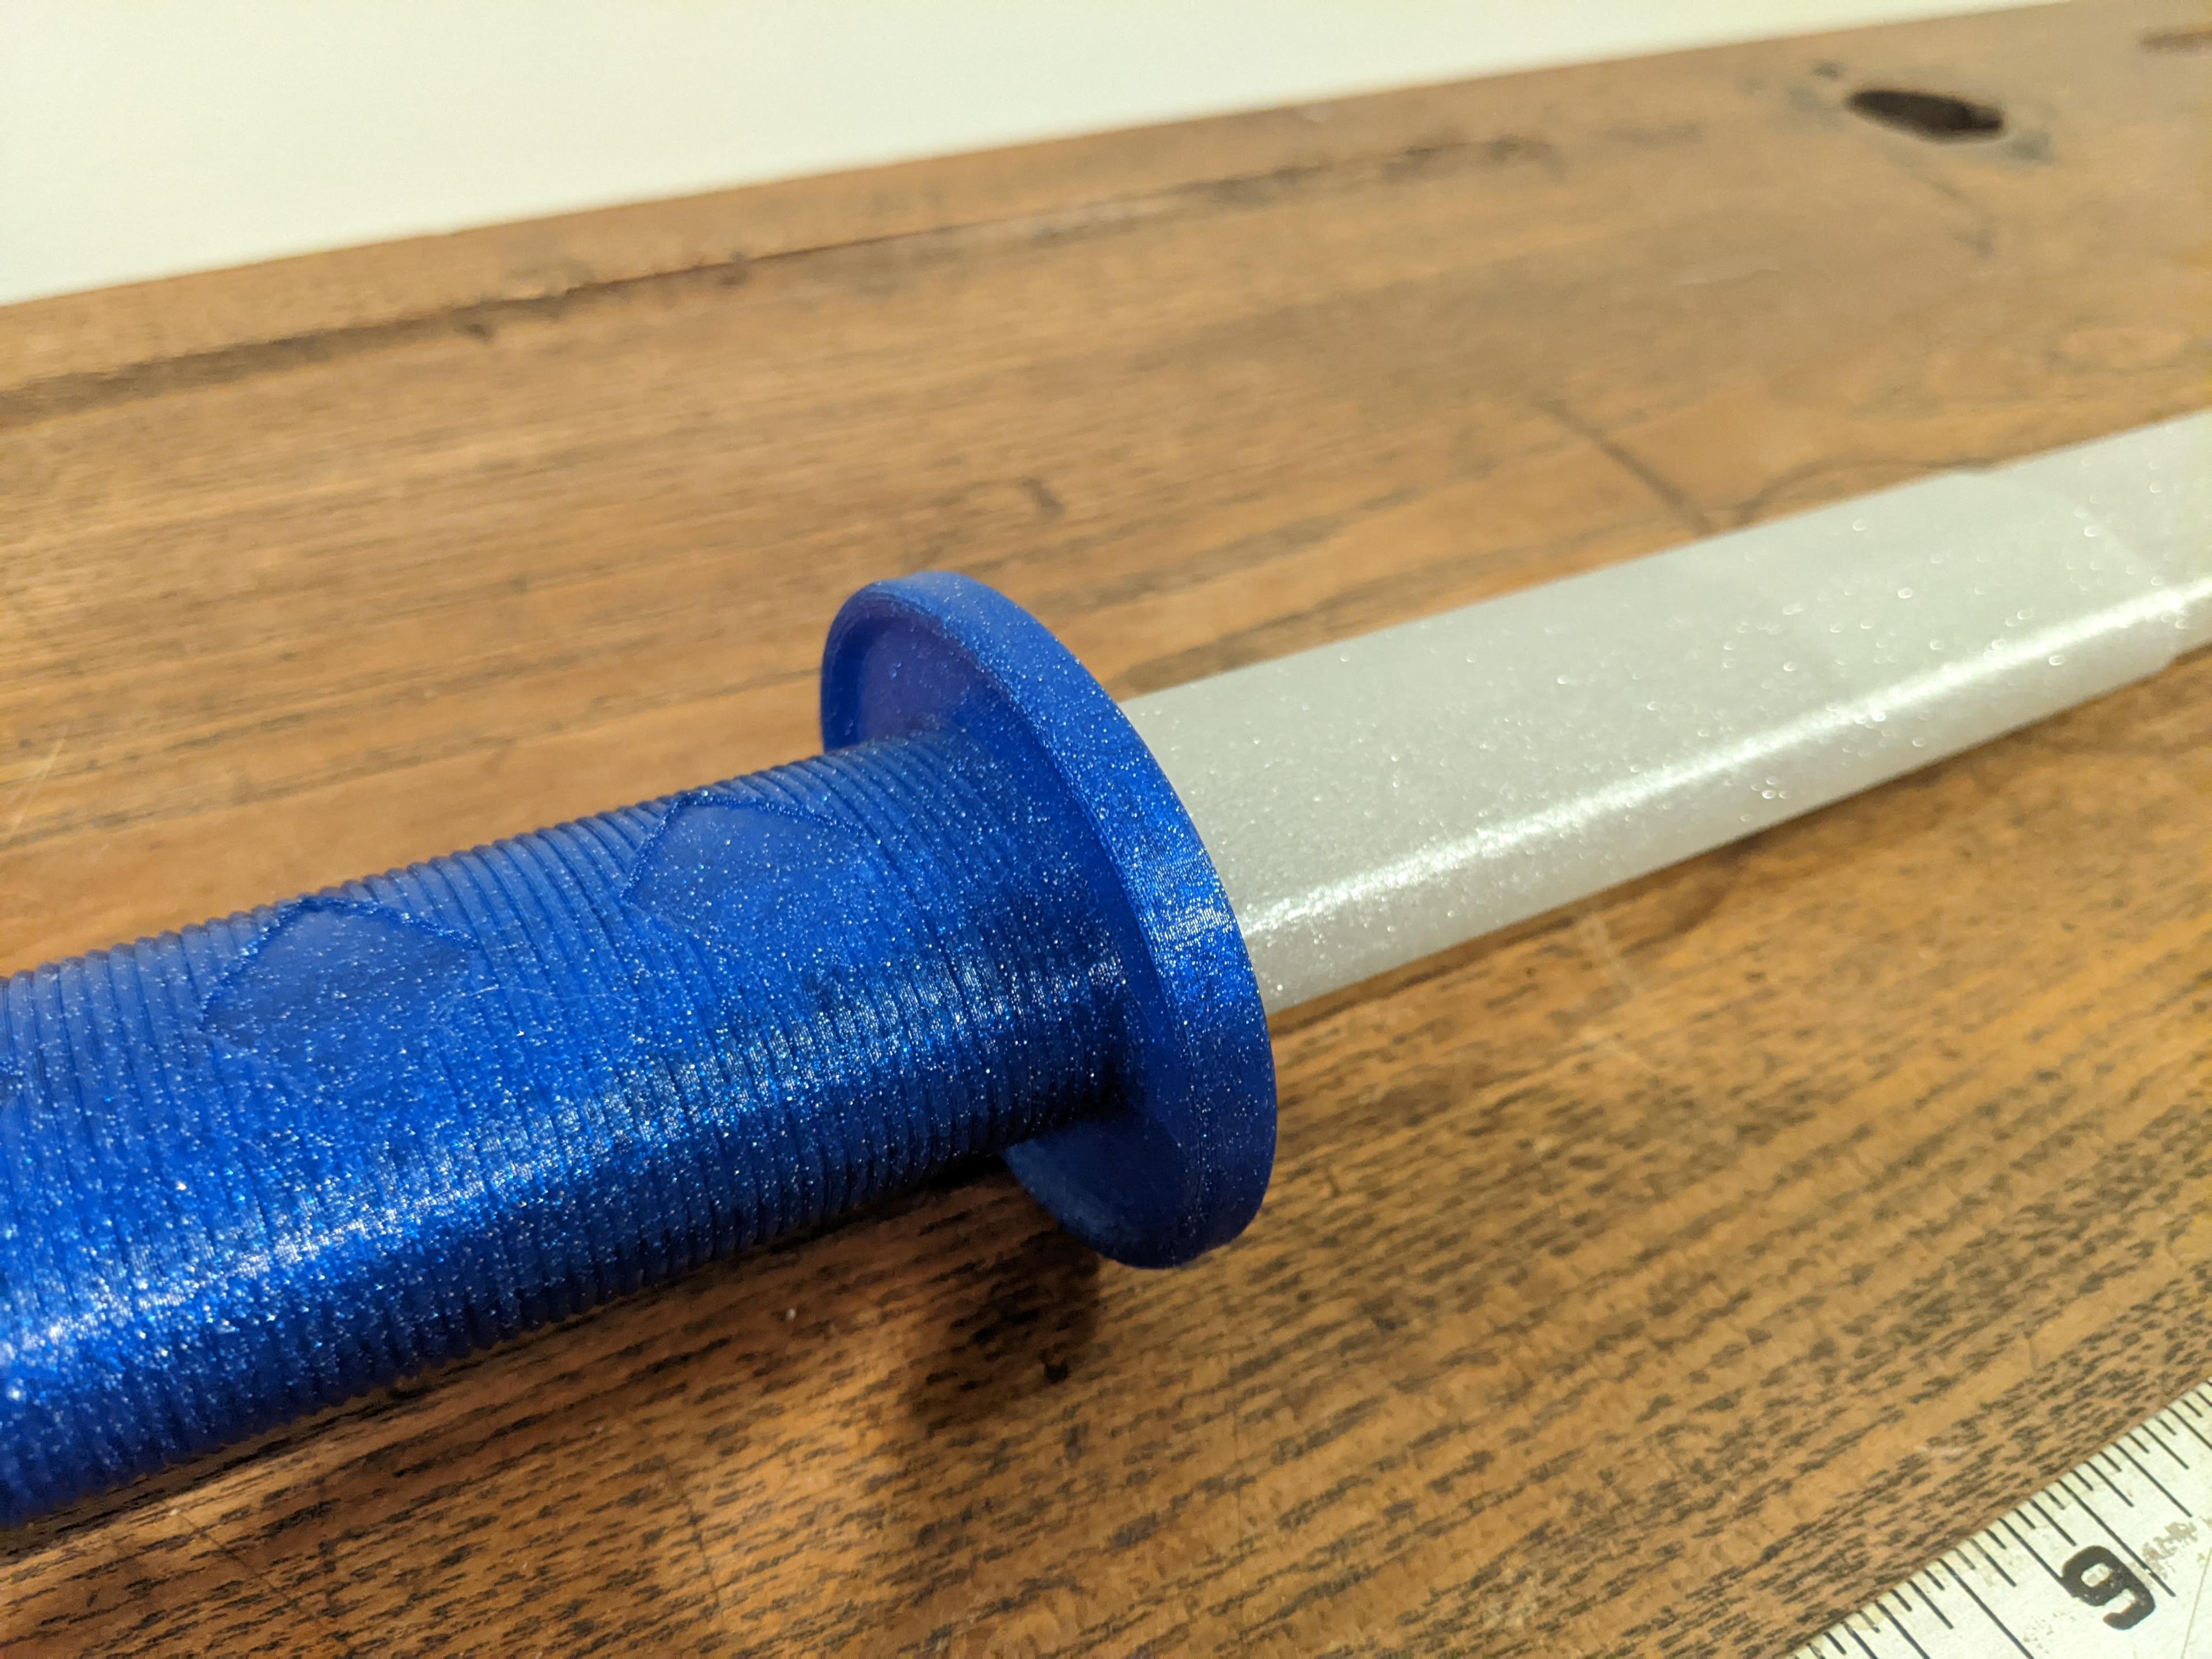 The 15 Best 3D Printed Sword Designs - Collapsible